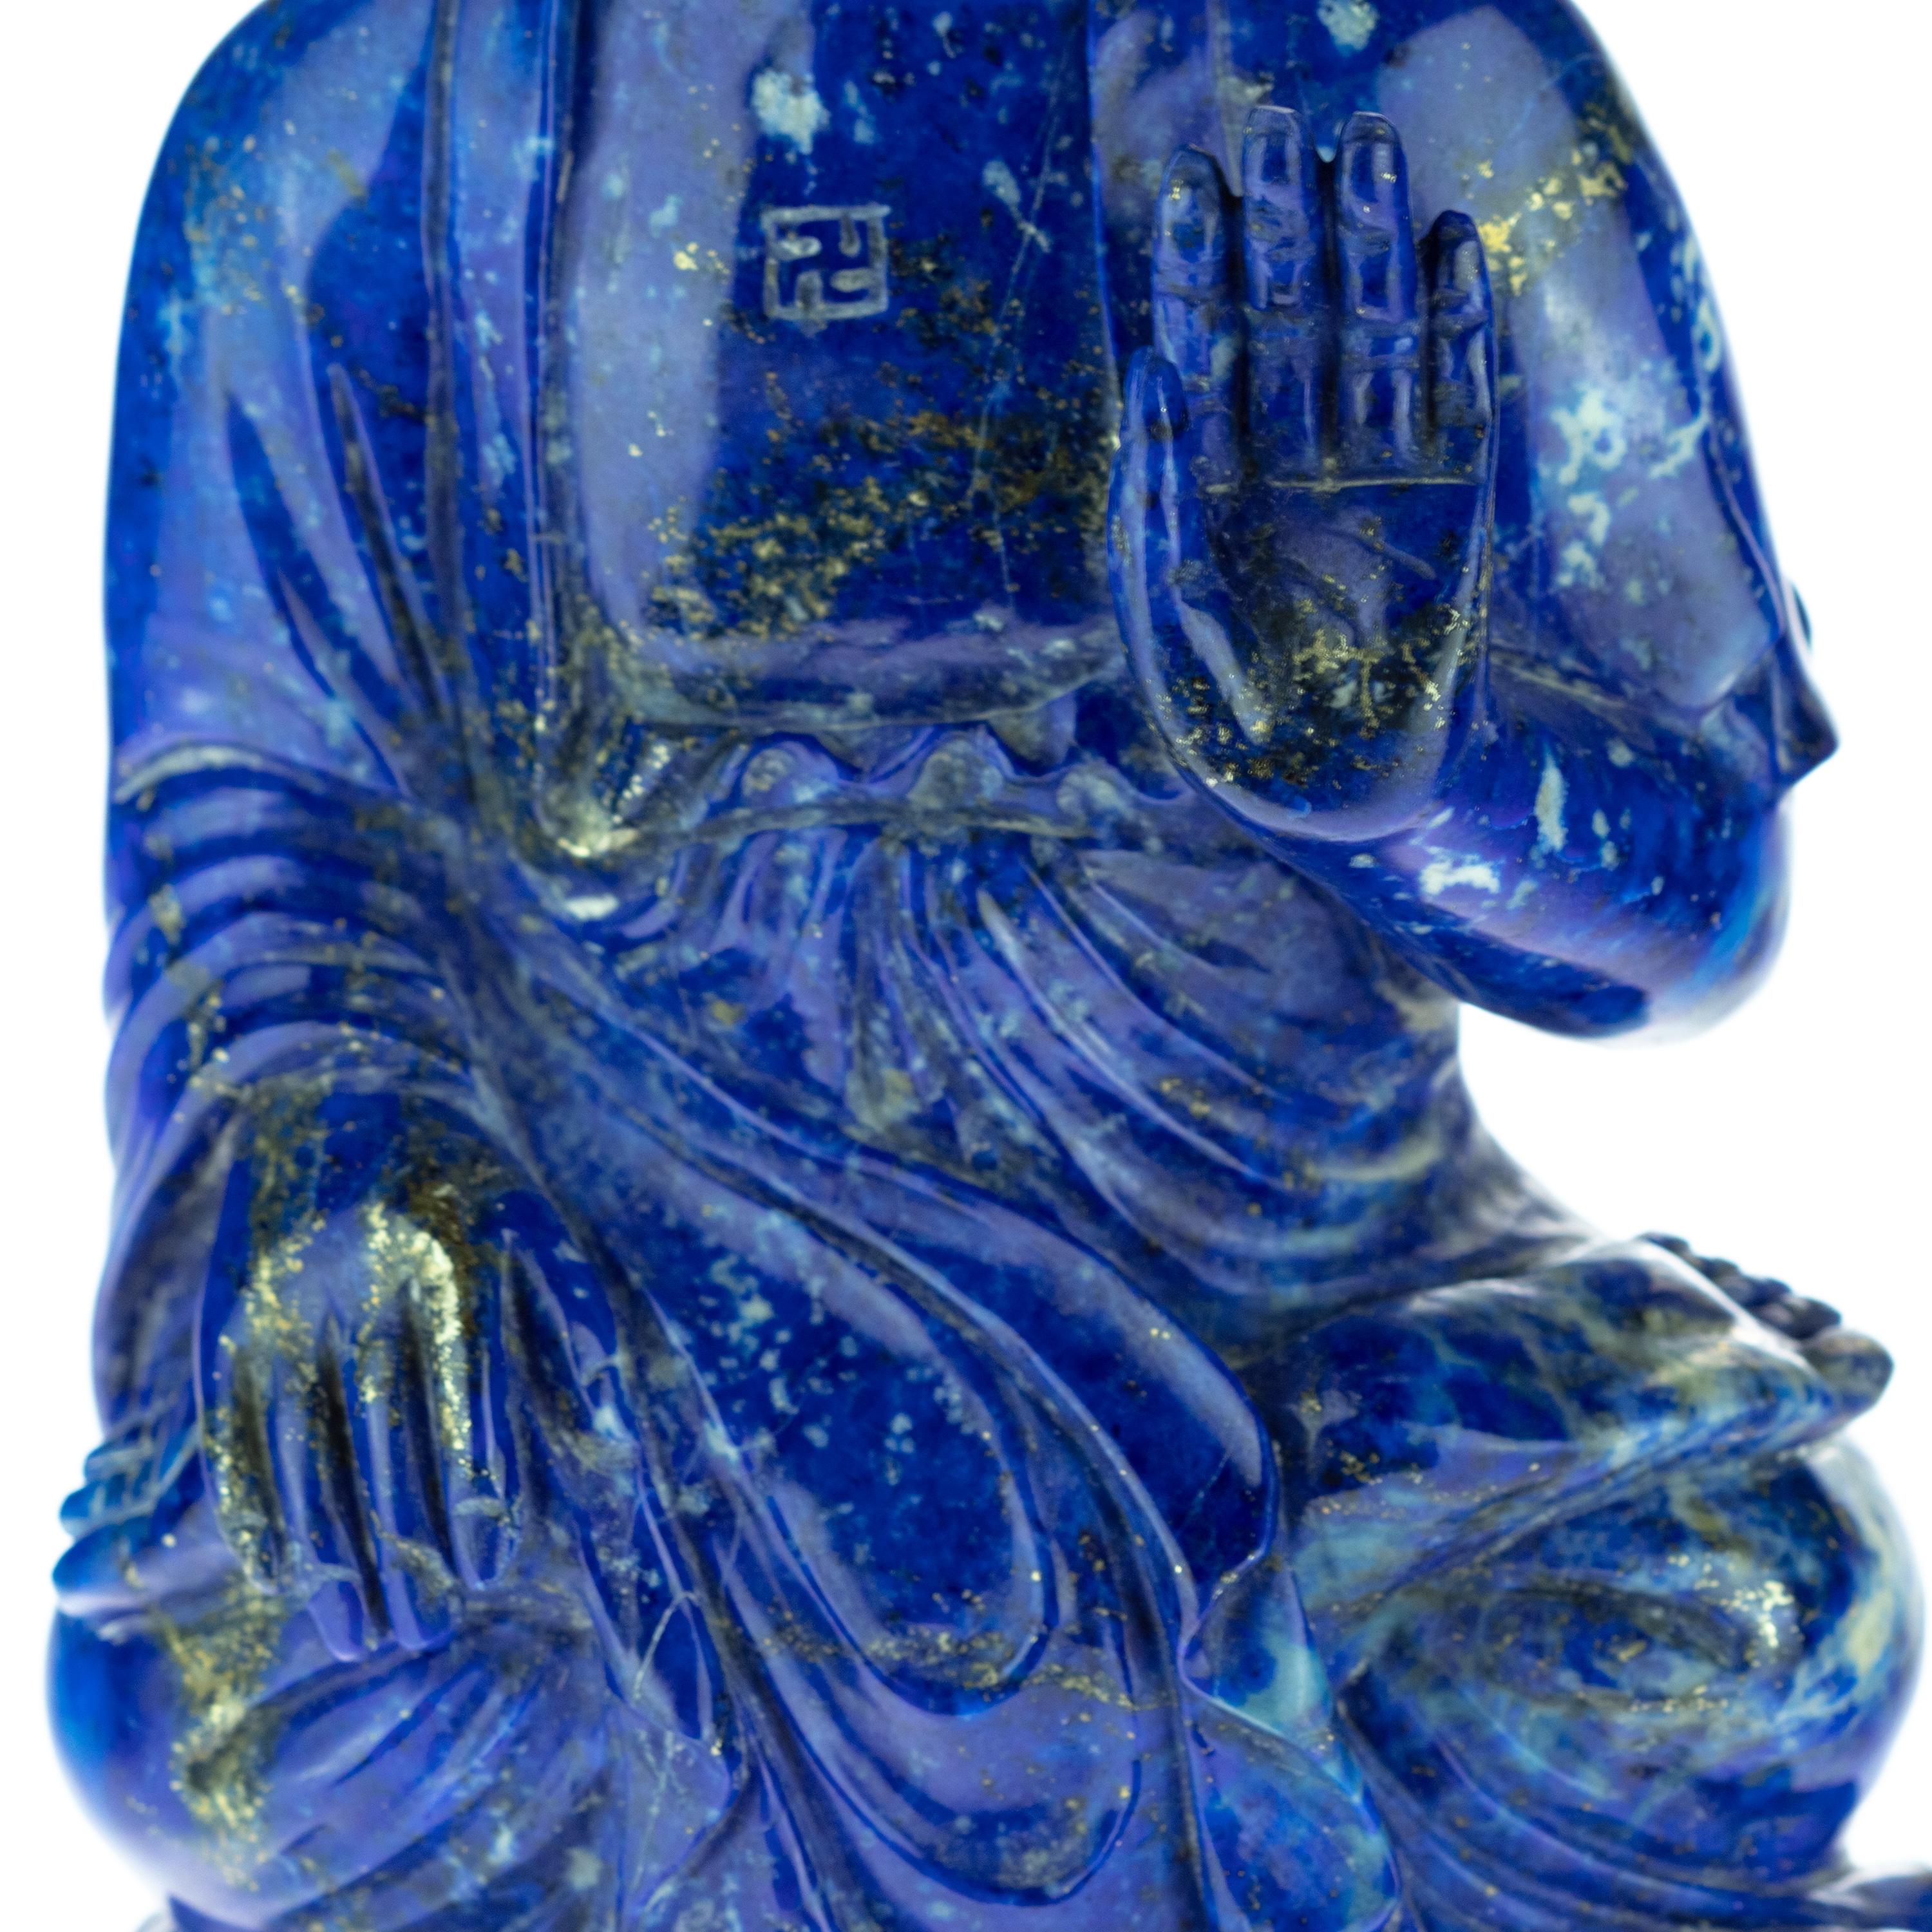 Chinese Export Lapis Lazuli Guanyin Bodhisattva Female Buddha Asian Art Carved Statue Sculpture For Sale